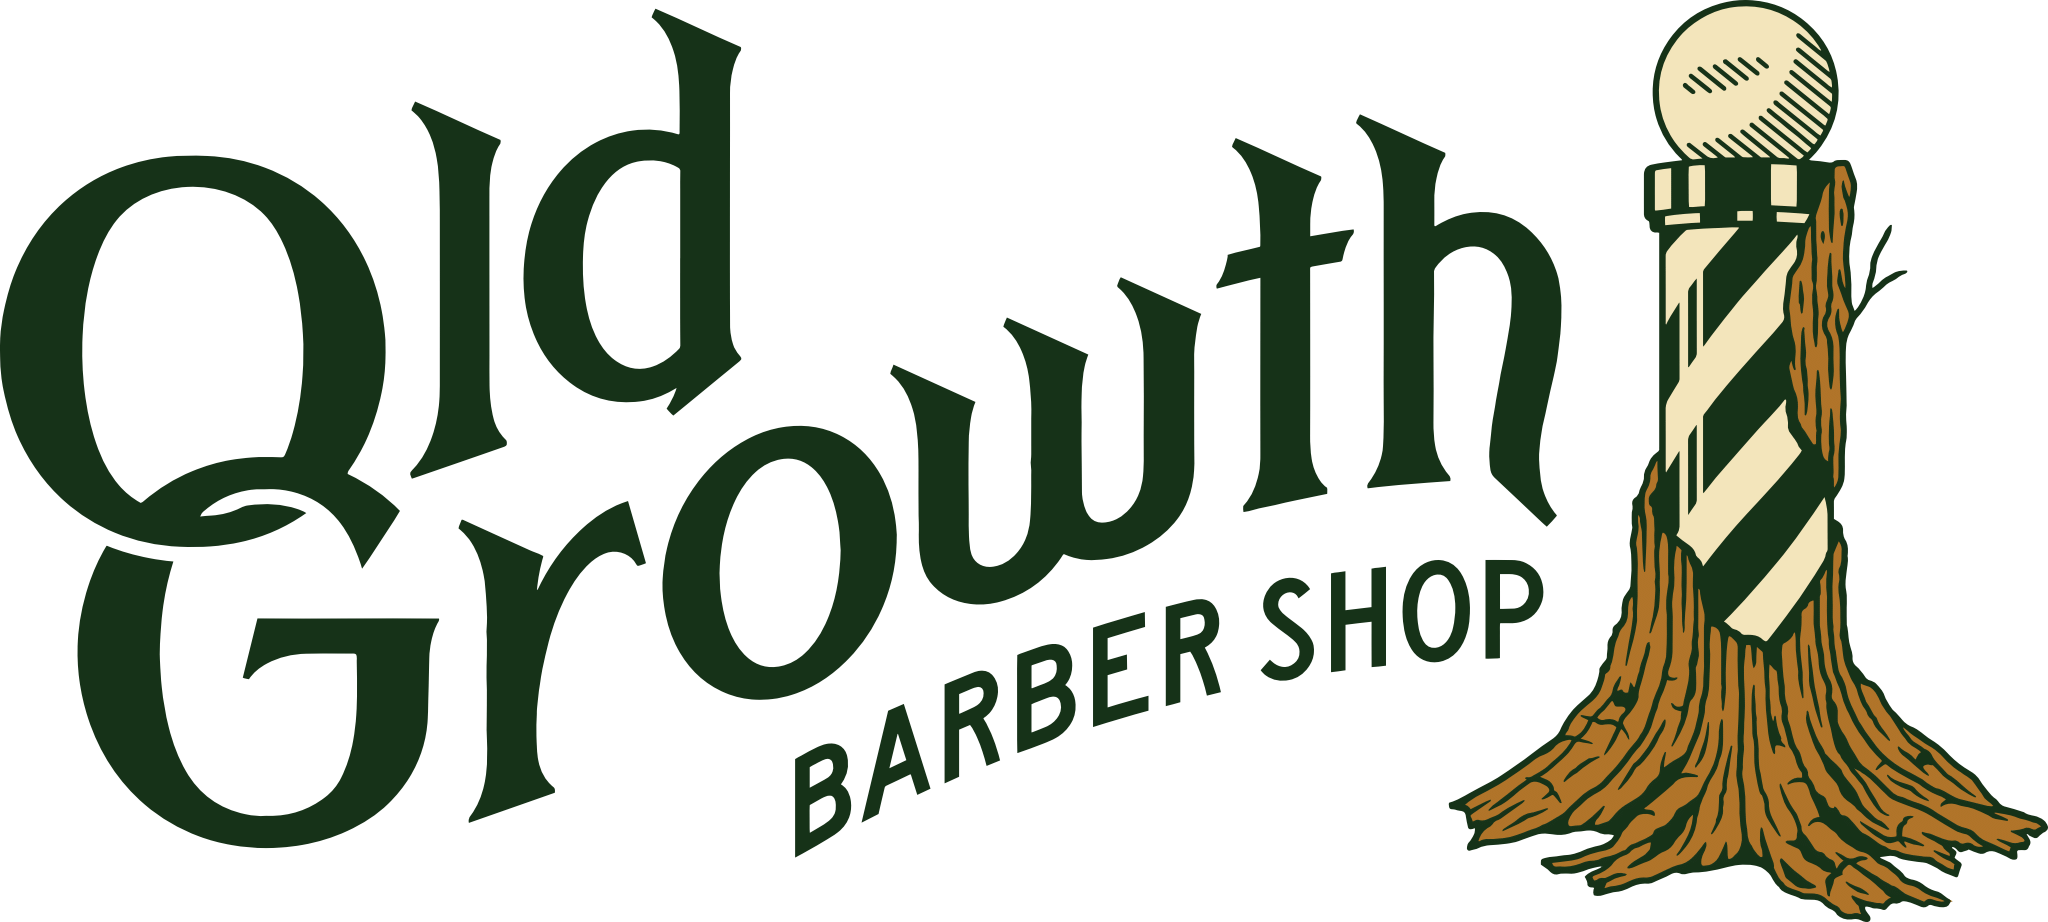 Old Growth Barber